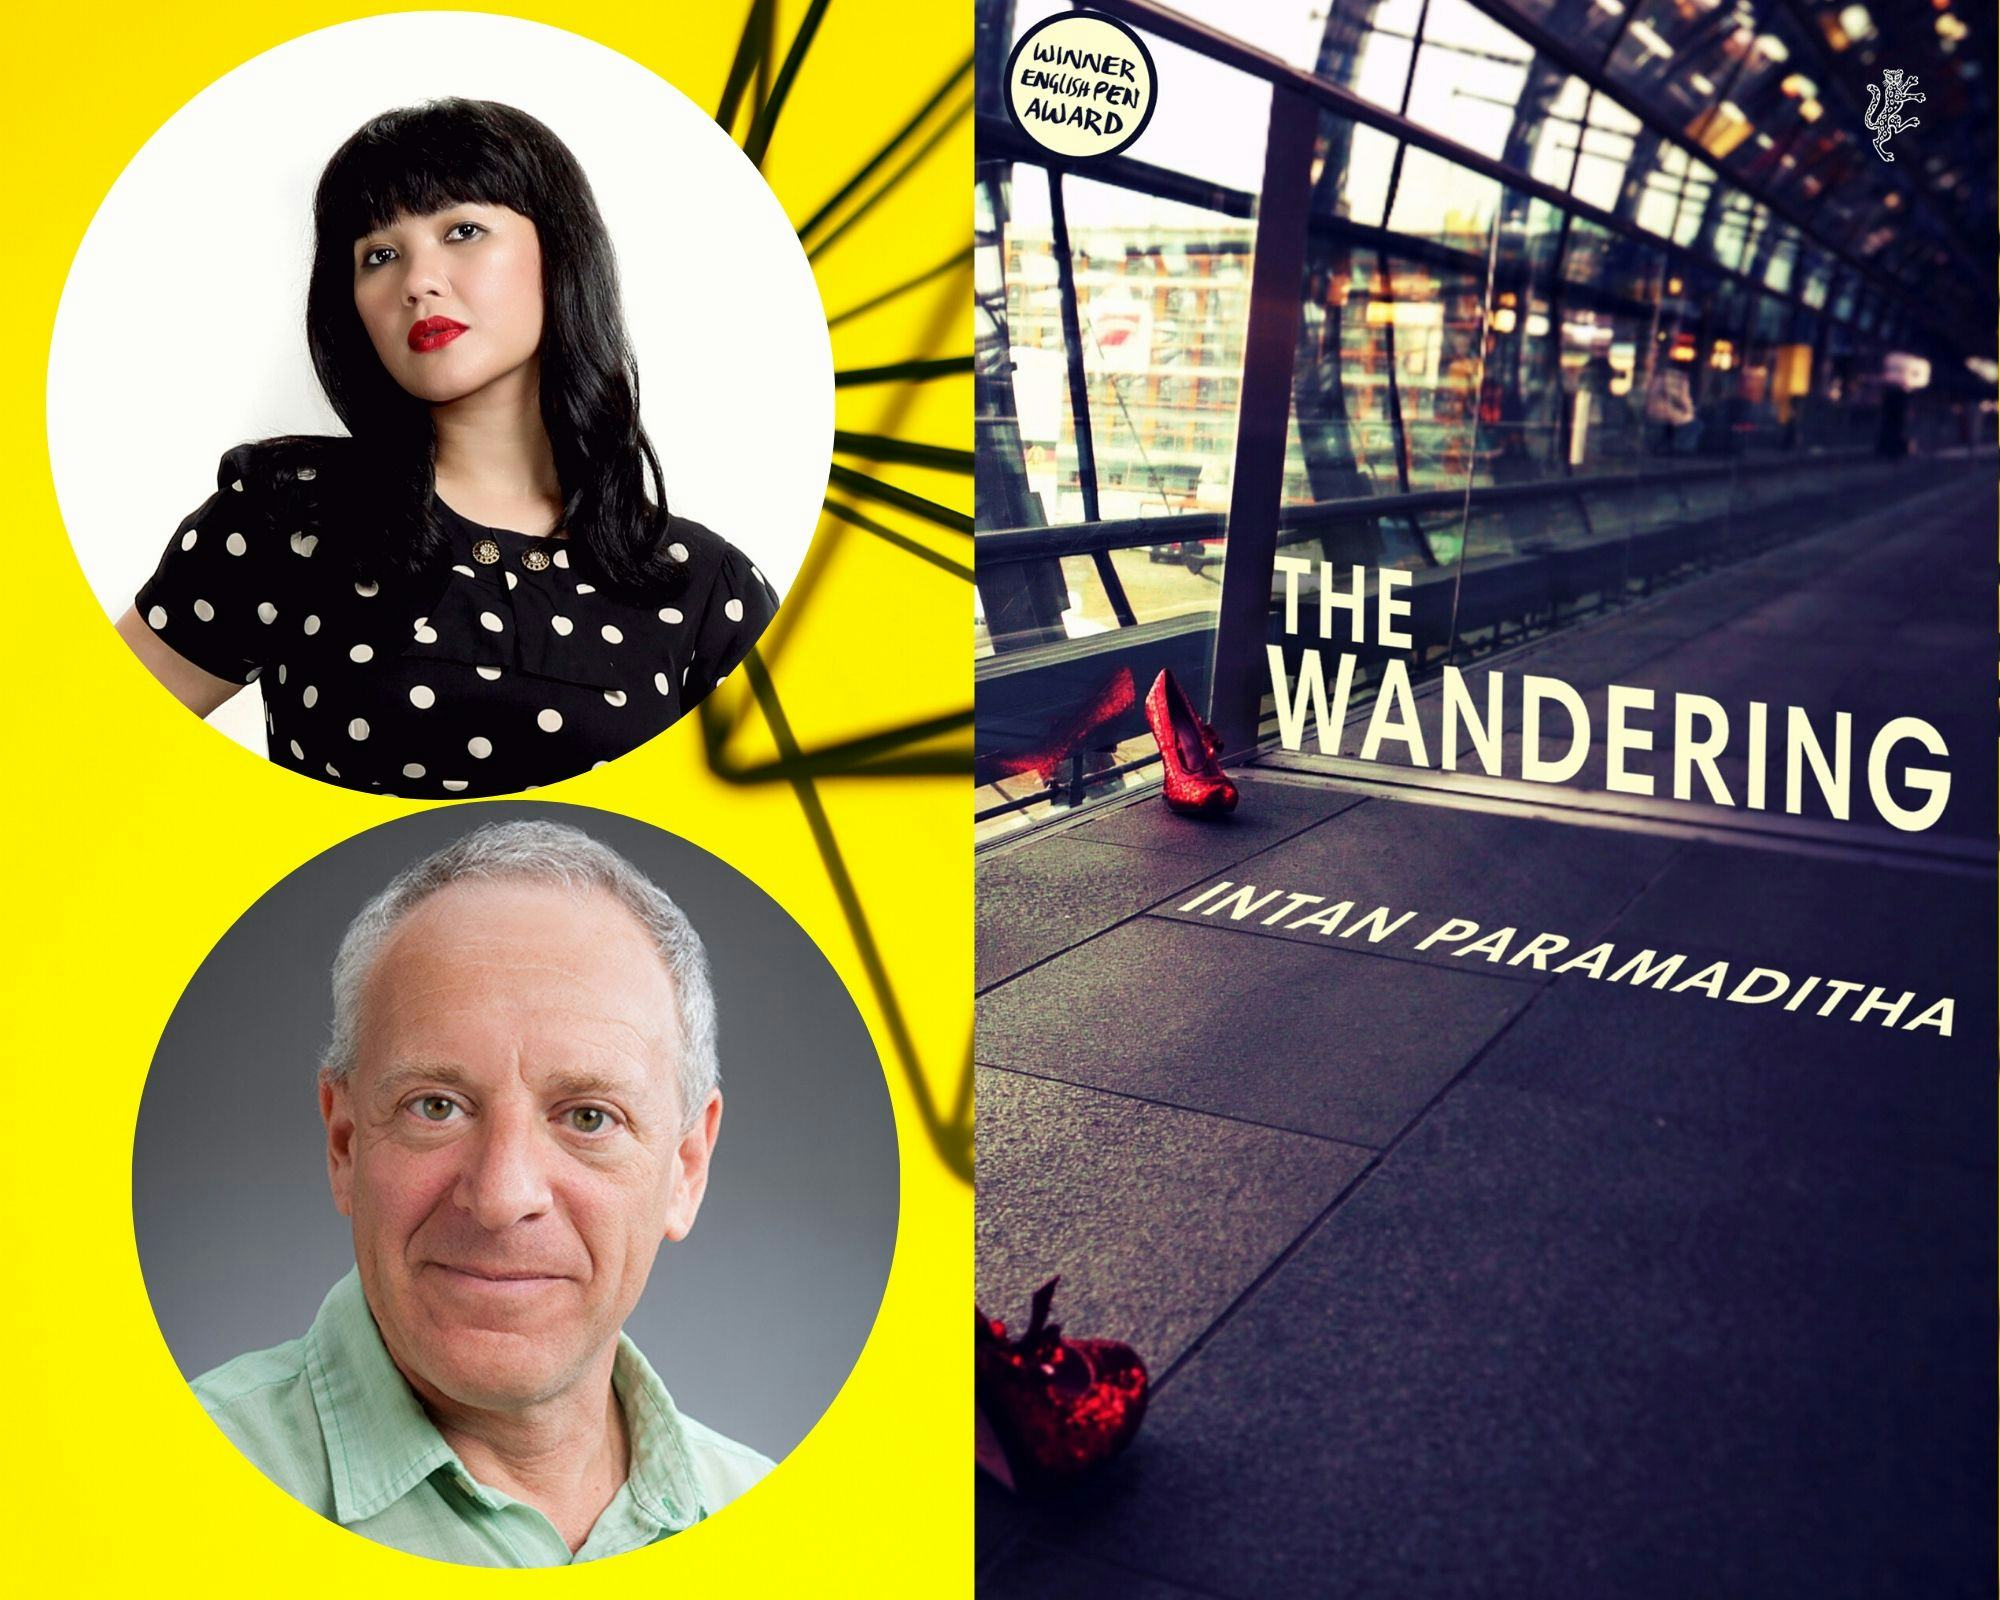 The Wandering: A Conversation between Stephen Epstein and Intan Paramaditha